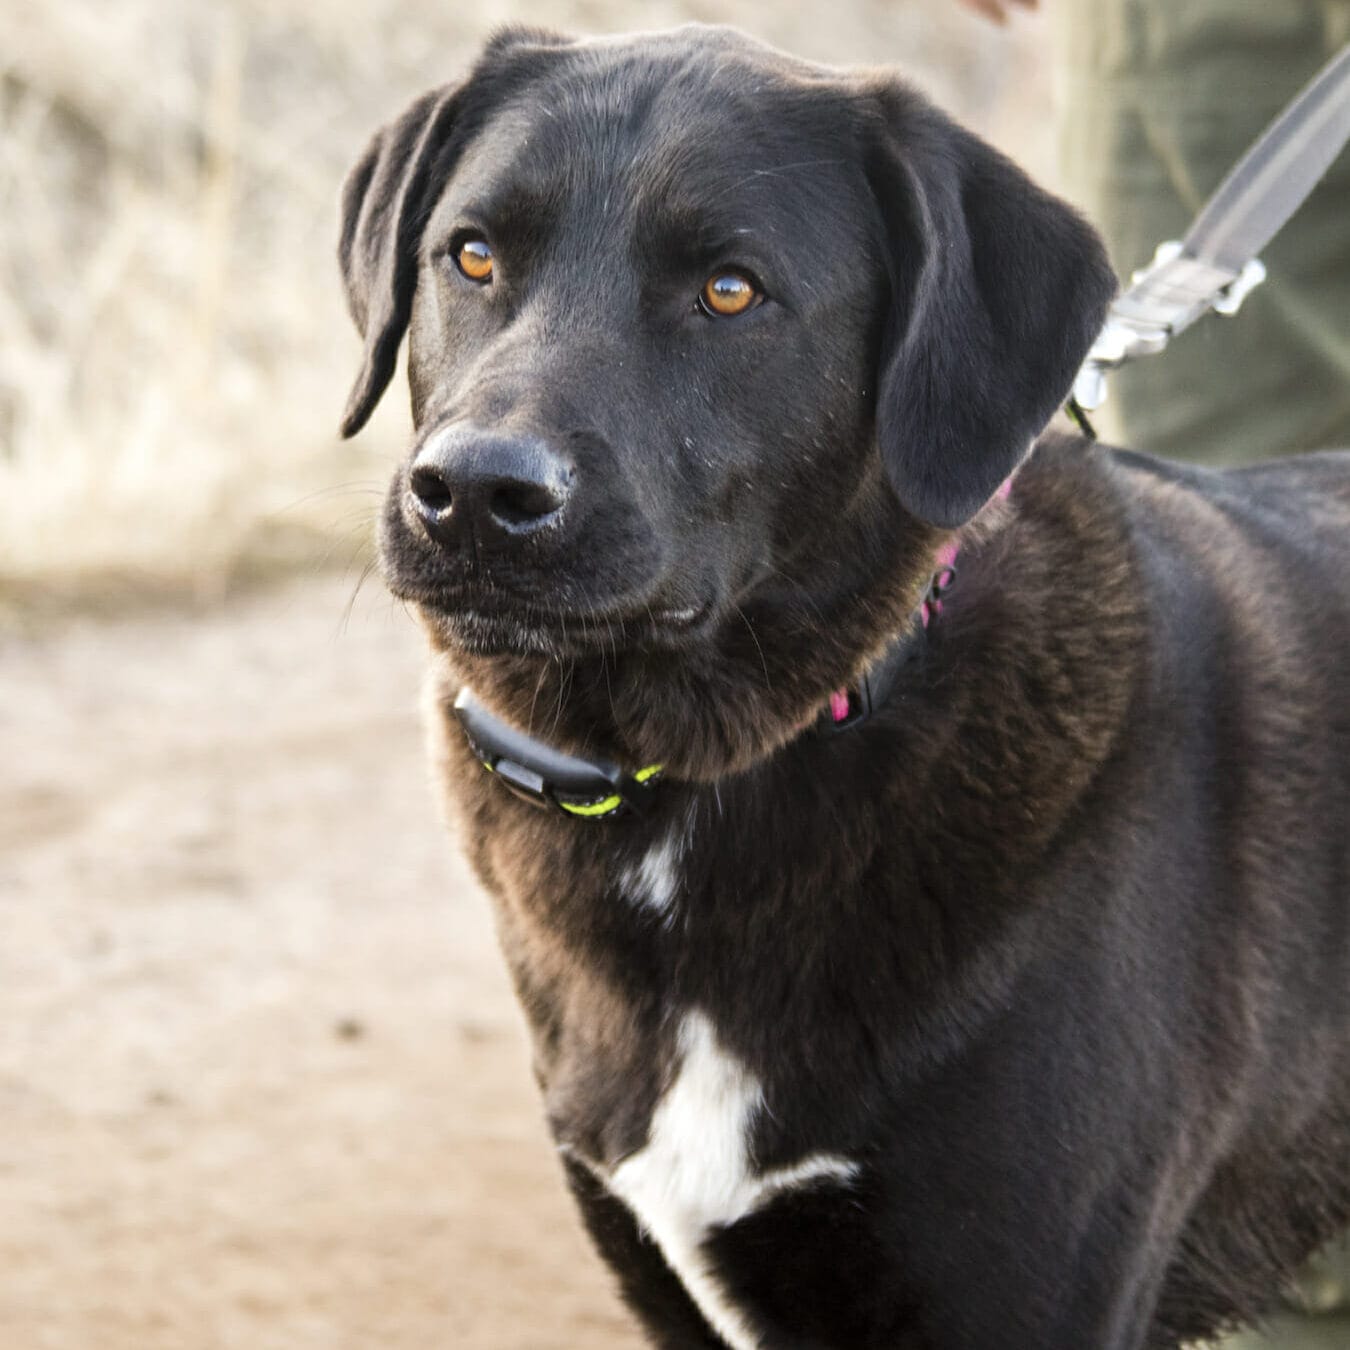 Black labrador with white spot on chest looking anxious on a leash. Read this article to form a relaxation protocol for your dog and read all the cues.